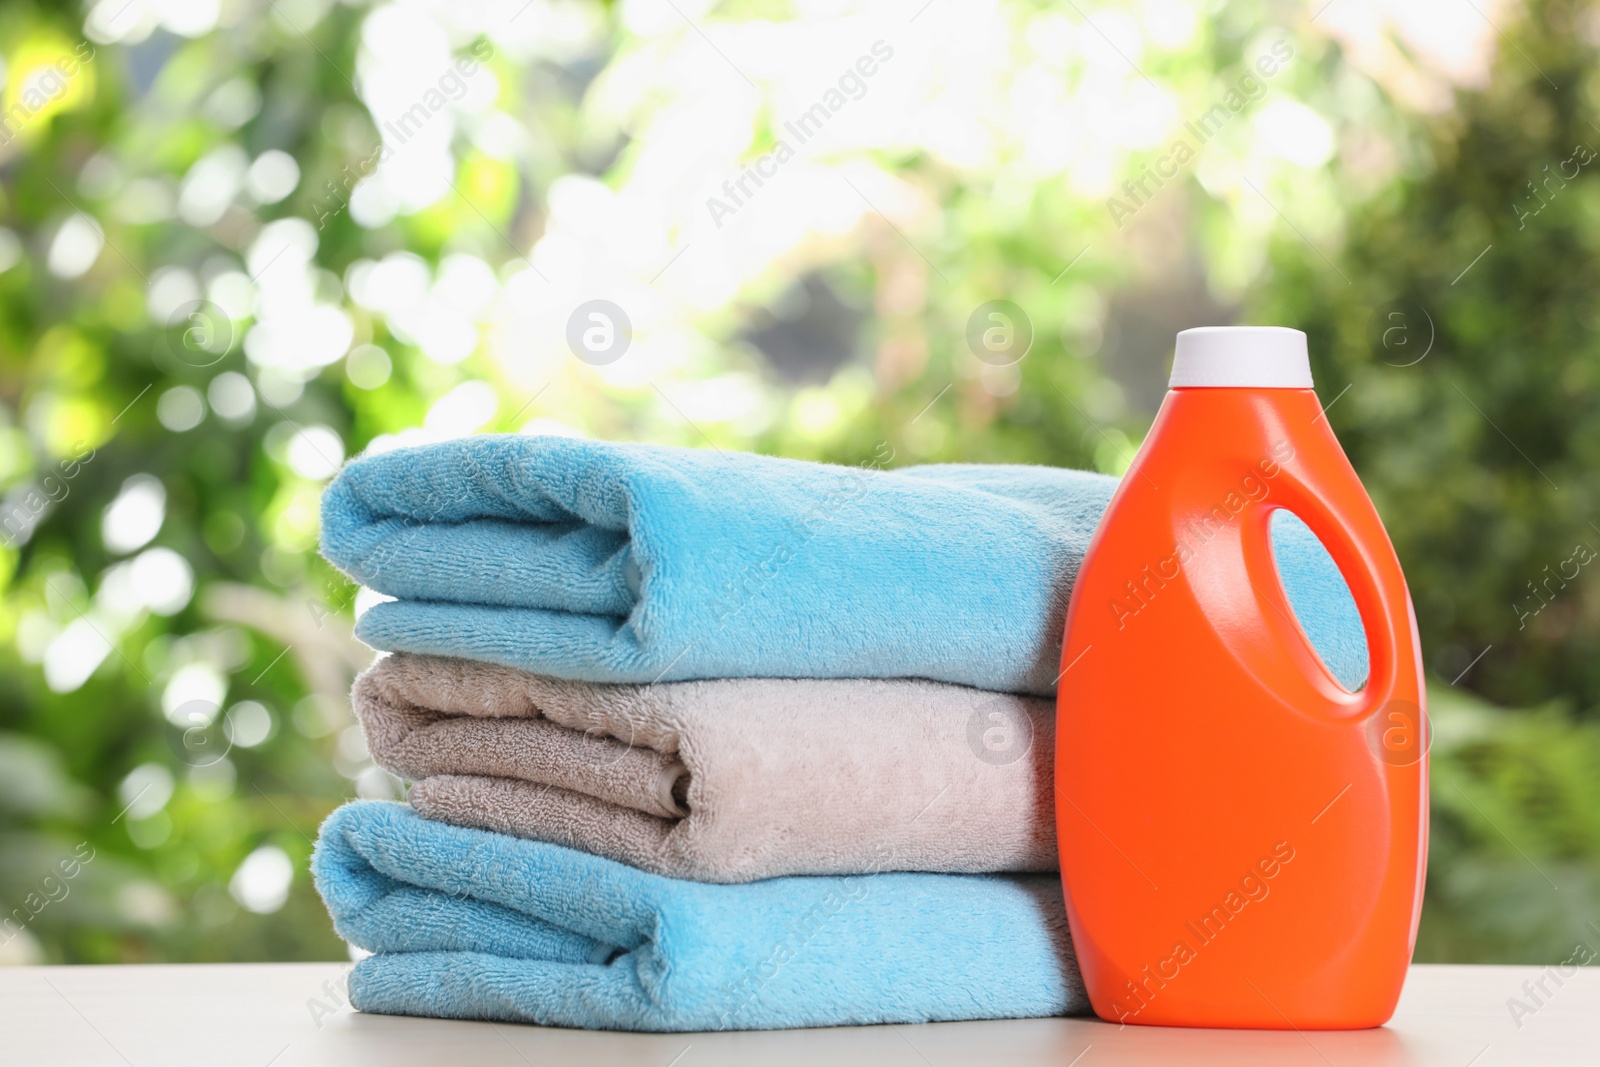 Photo of Soft bath towels and laundry detergent on table against blurred background